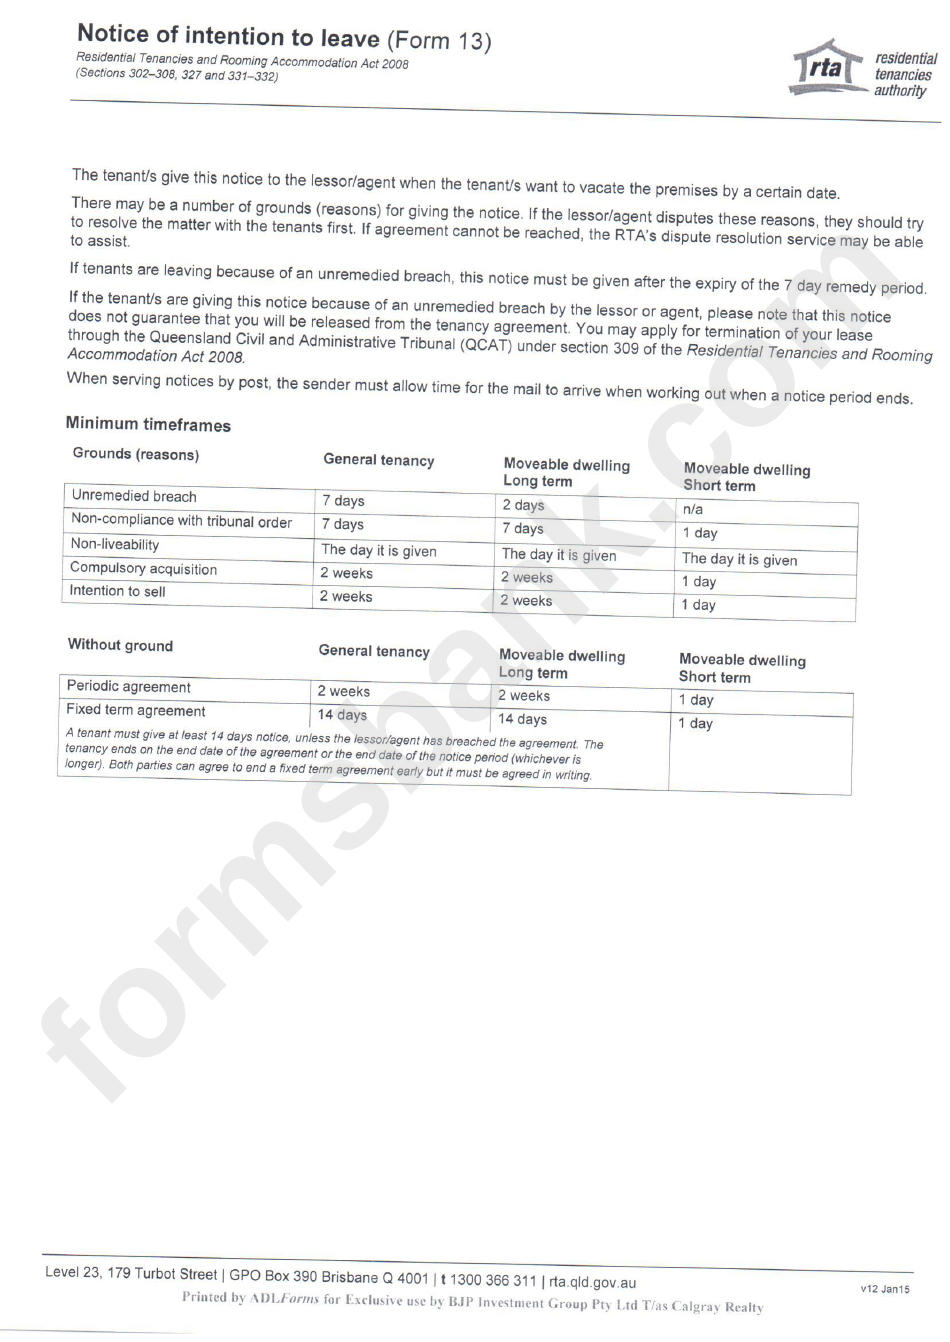 Form 13 - Notice Of Intention To Leave